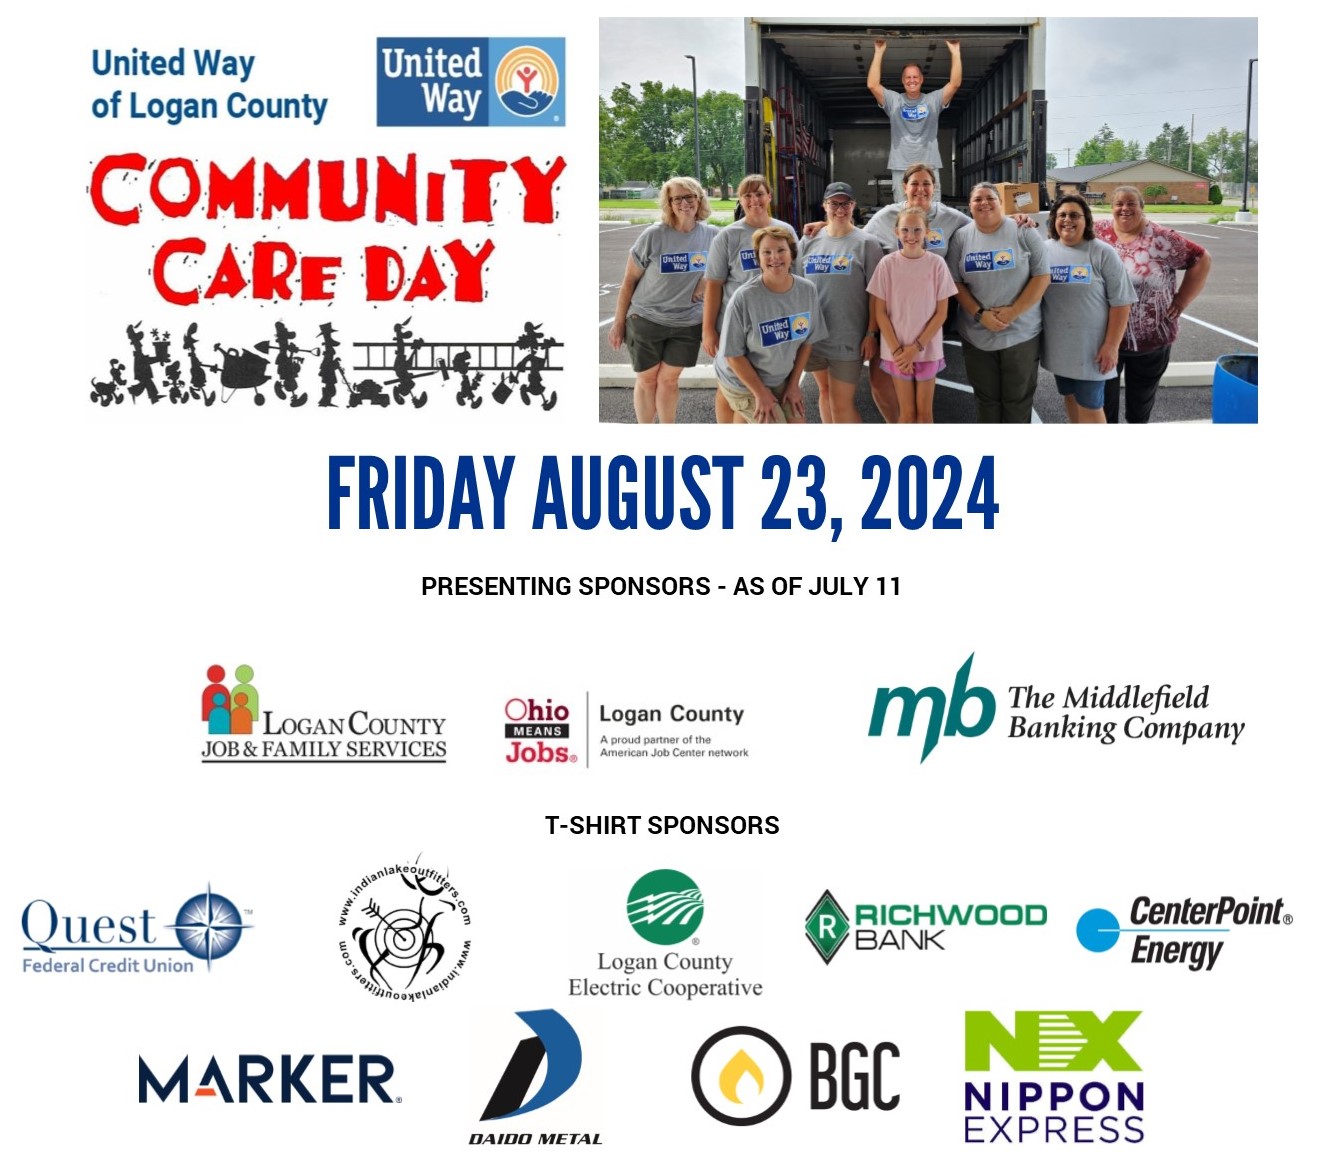 Community Care Day is Friday August 23